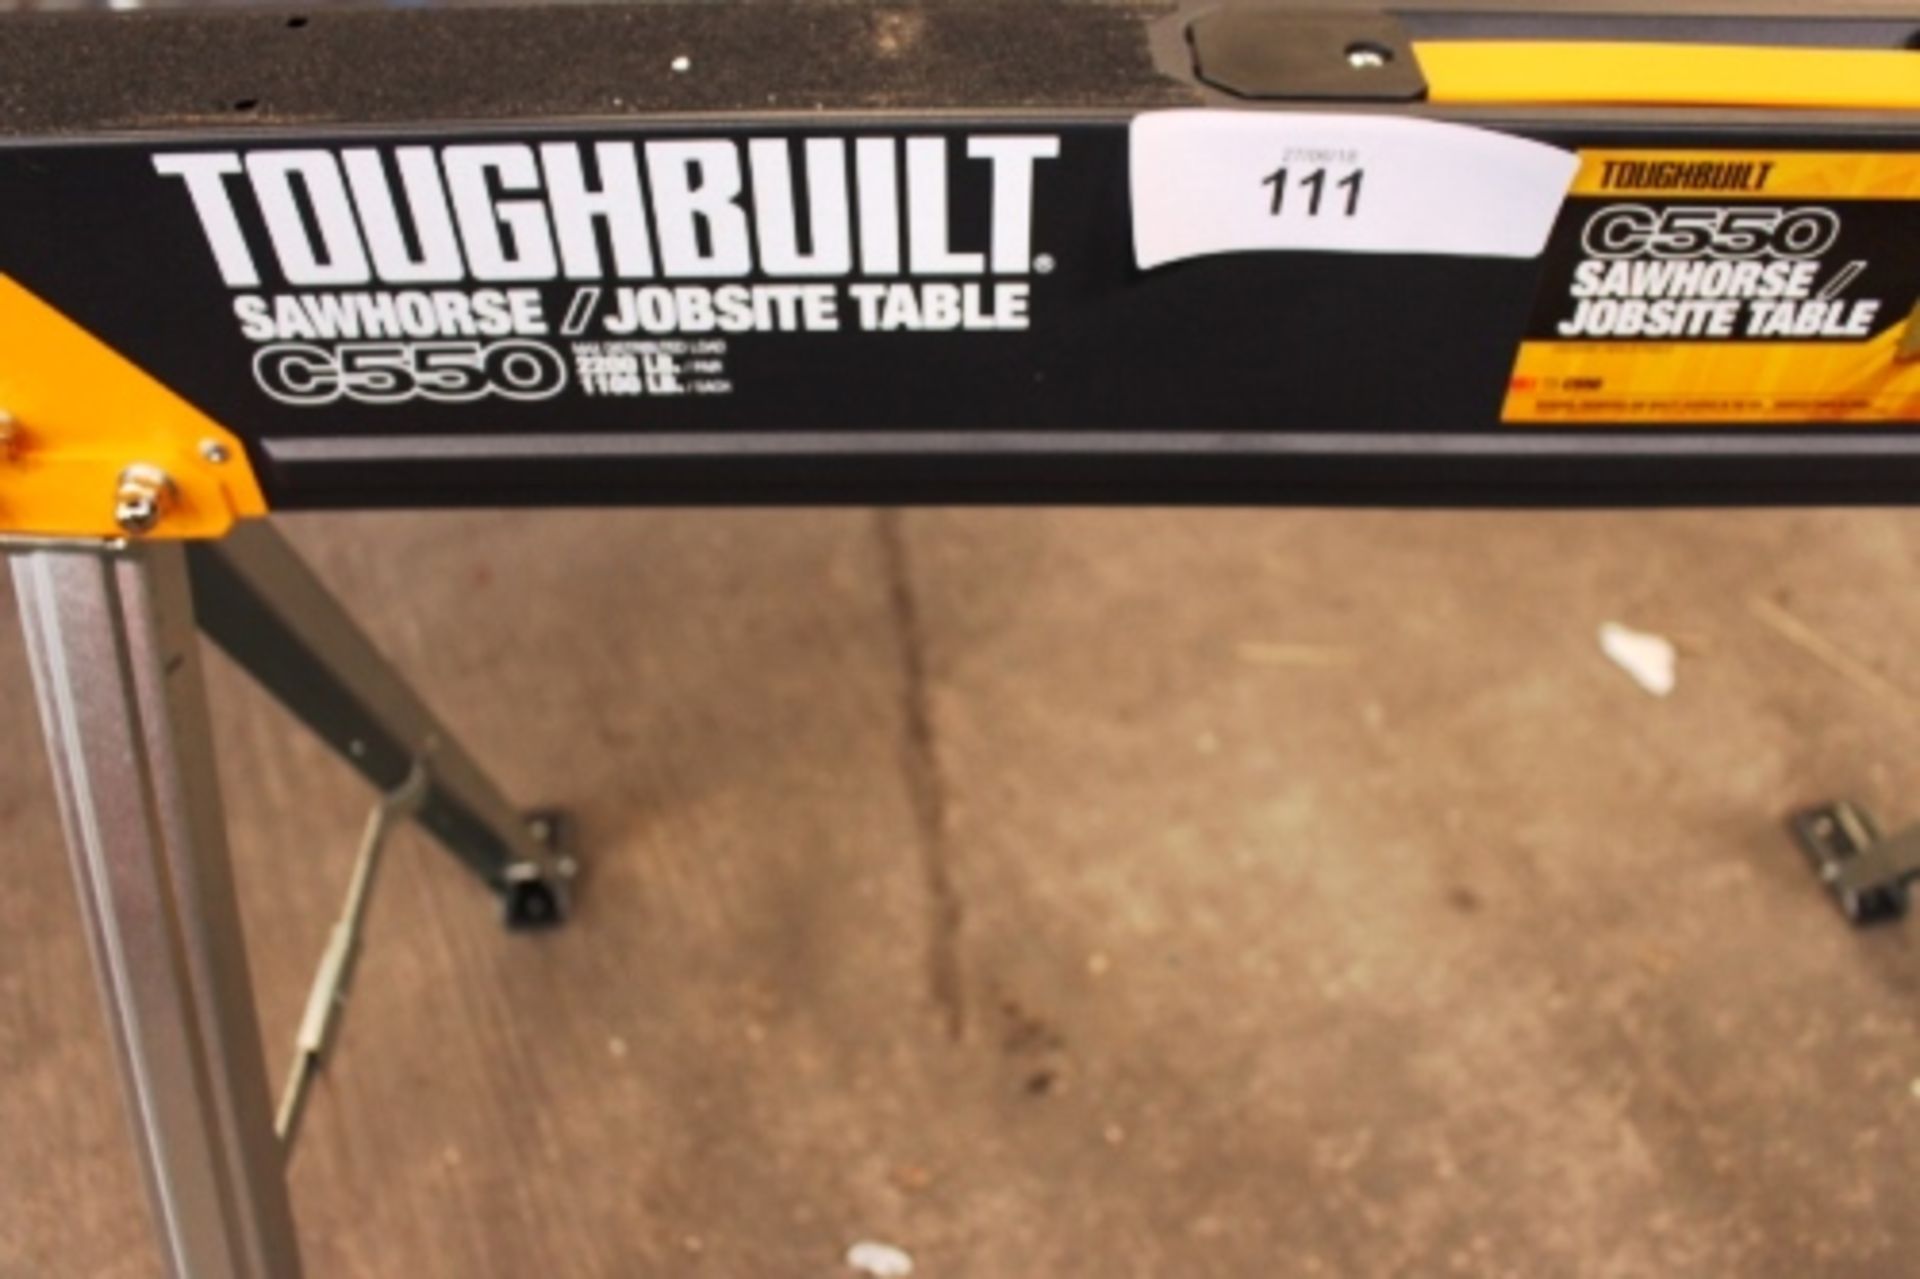 Toughbuilt saw horse job site table - New in box (TC1 Floor) - Image 2 of 3